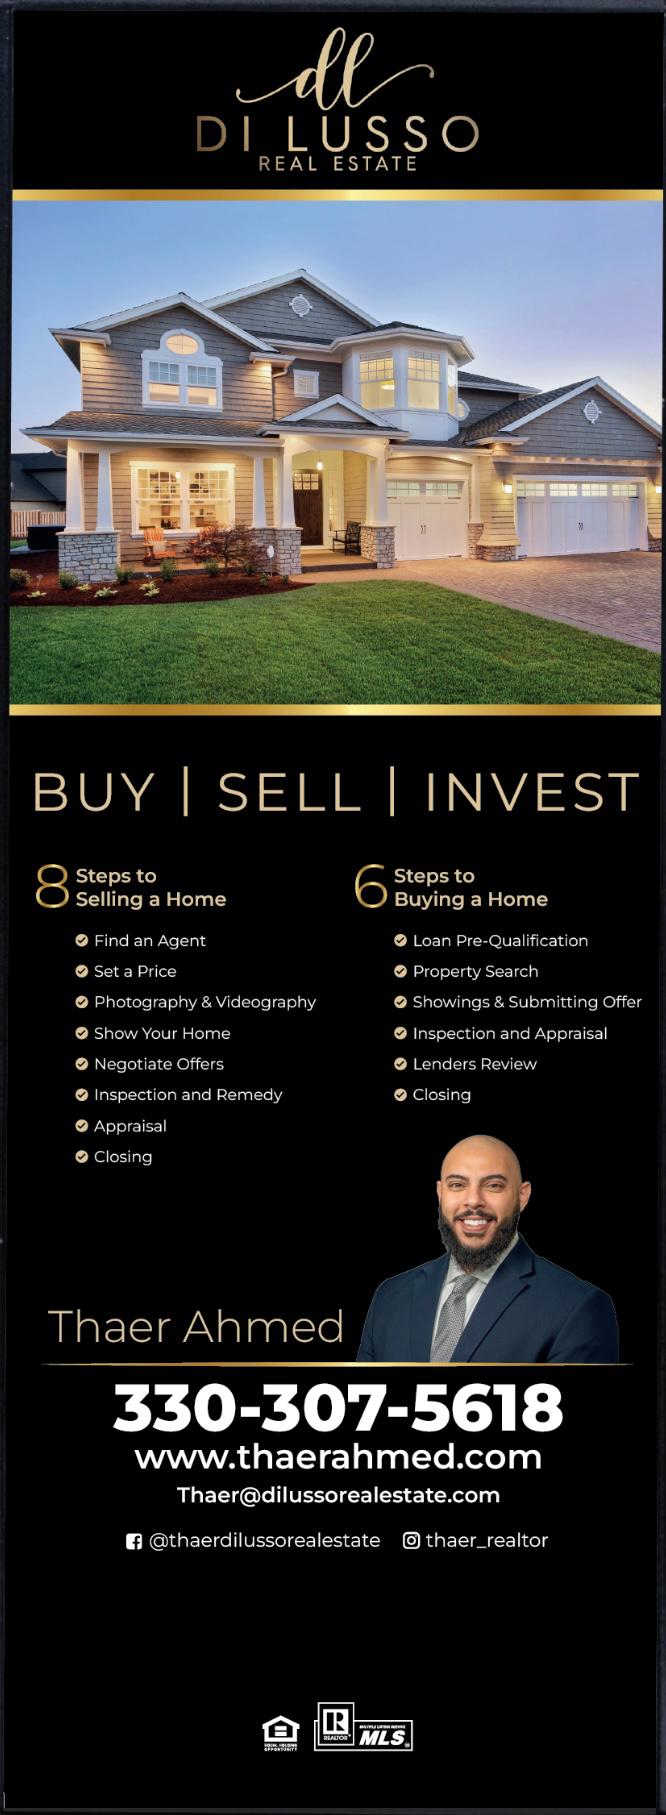 Thaer Ahmed, Di Lusso Real Estate